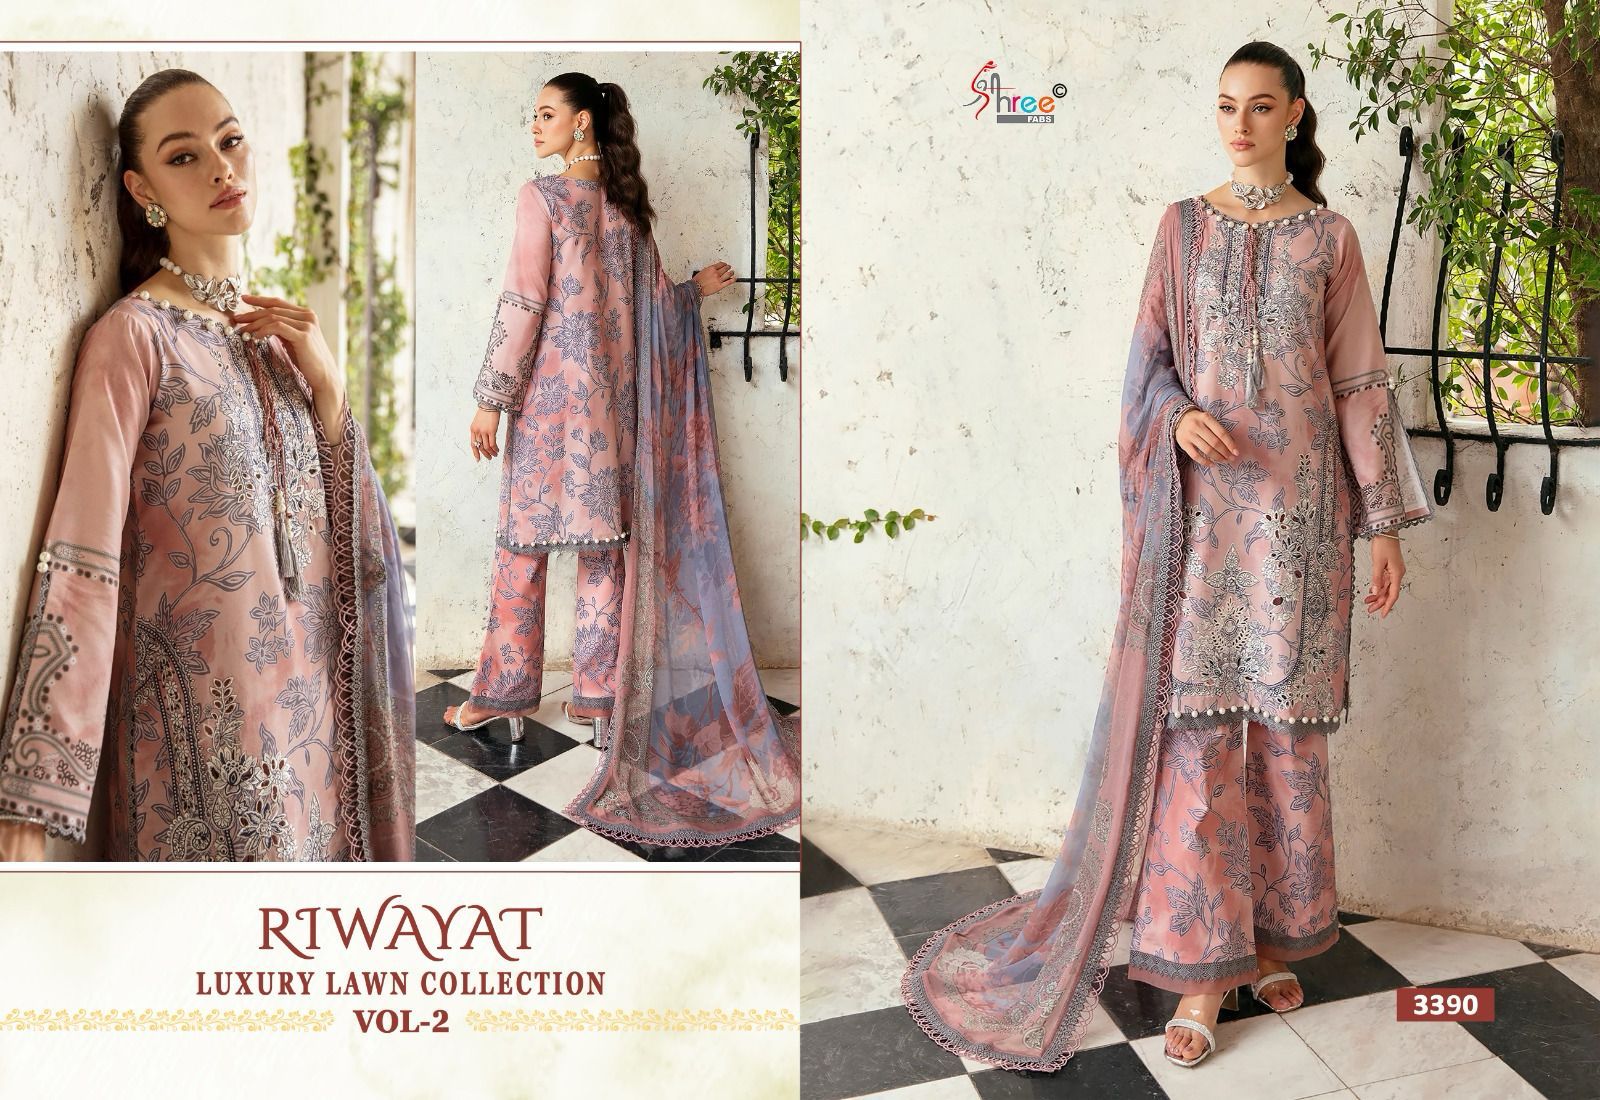 Shree Riwayat Luxury Lawn Collection Vol 2 collection 3